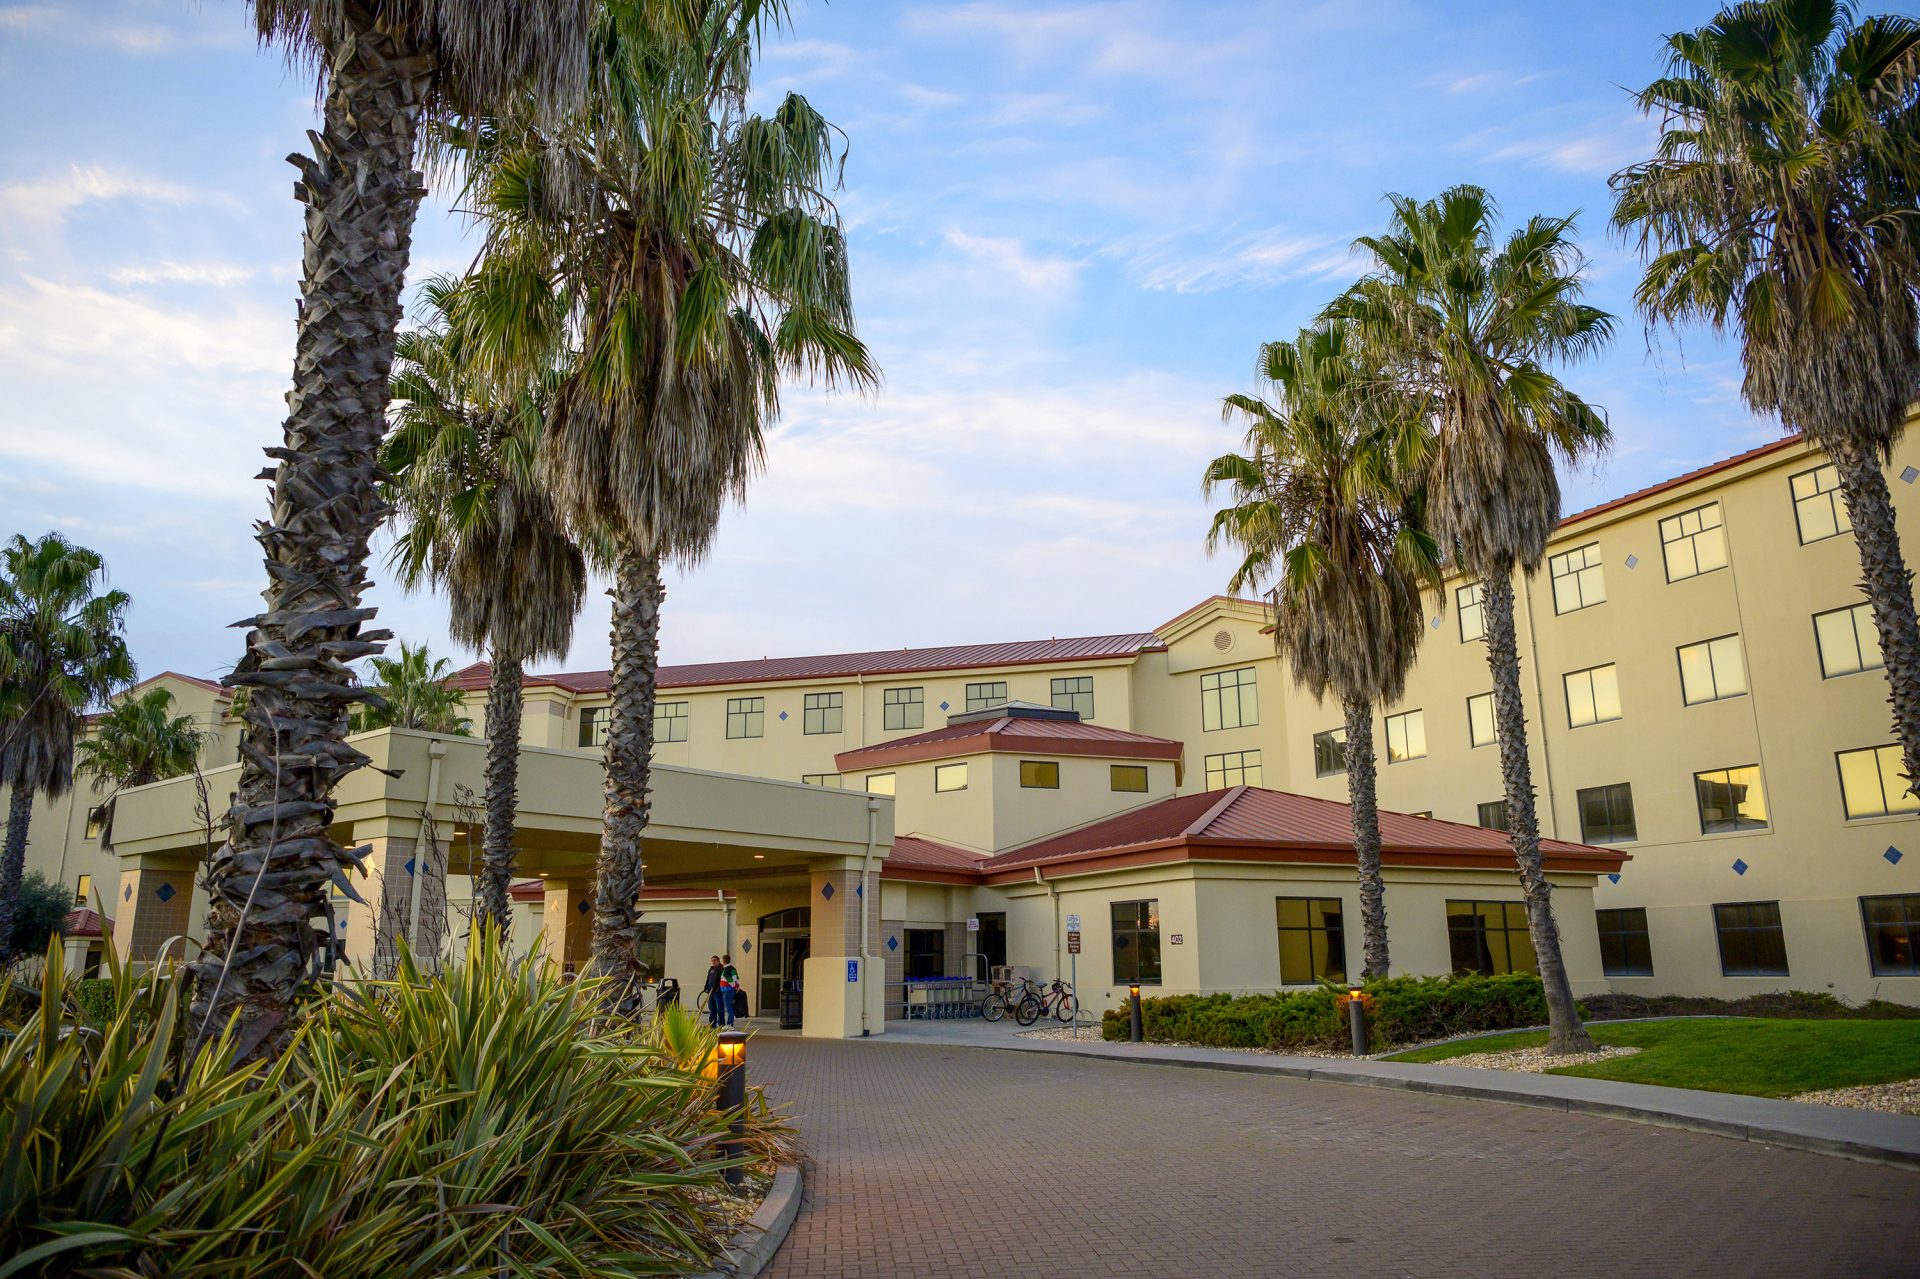 Evacuees are being held in quarantine at the Westwind Inn lodging facility at Travis Air Force Base in California